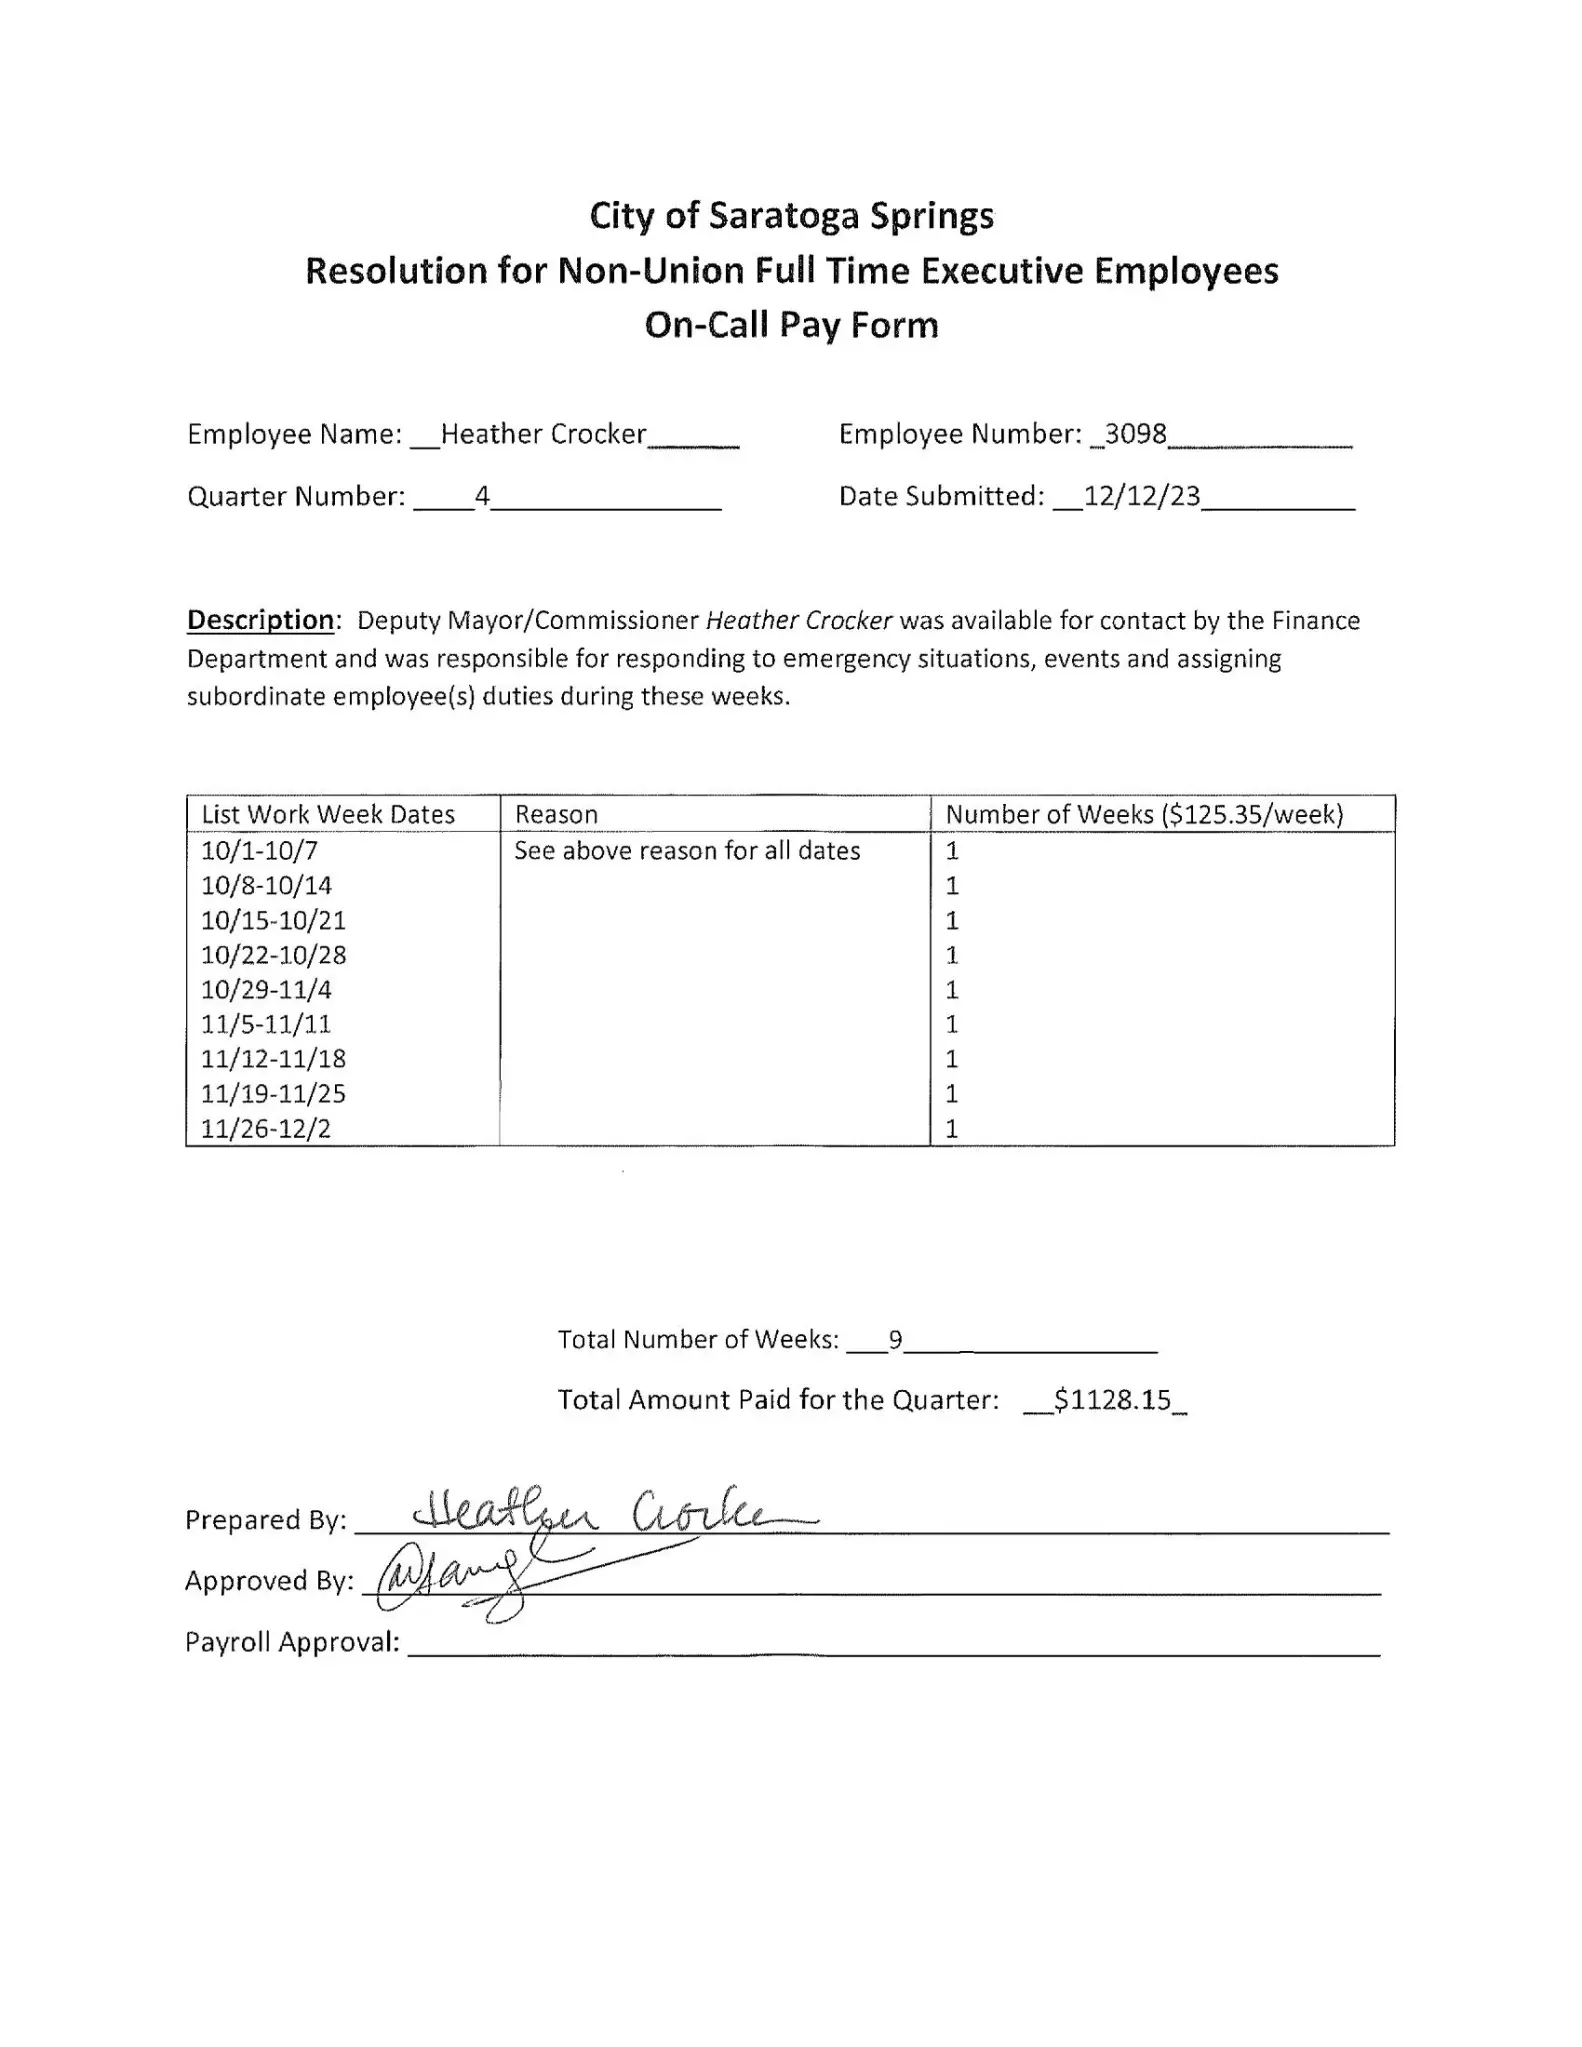 kaufmann-supplemental-foil-reply-on-call-pay_page_3.webp